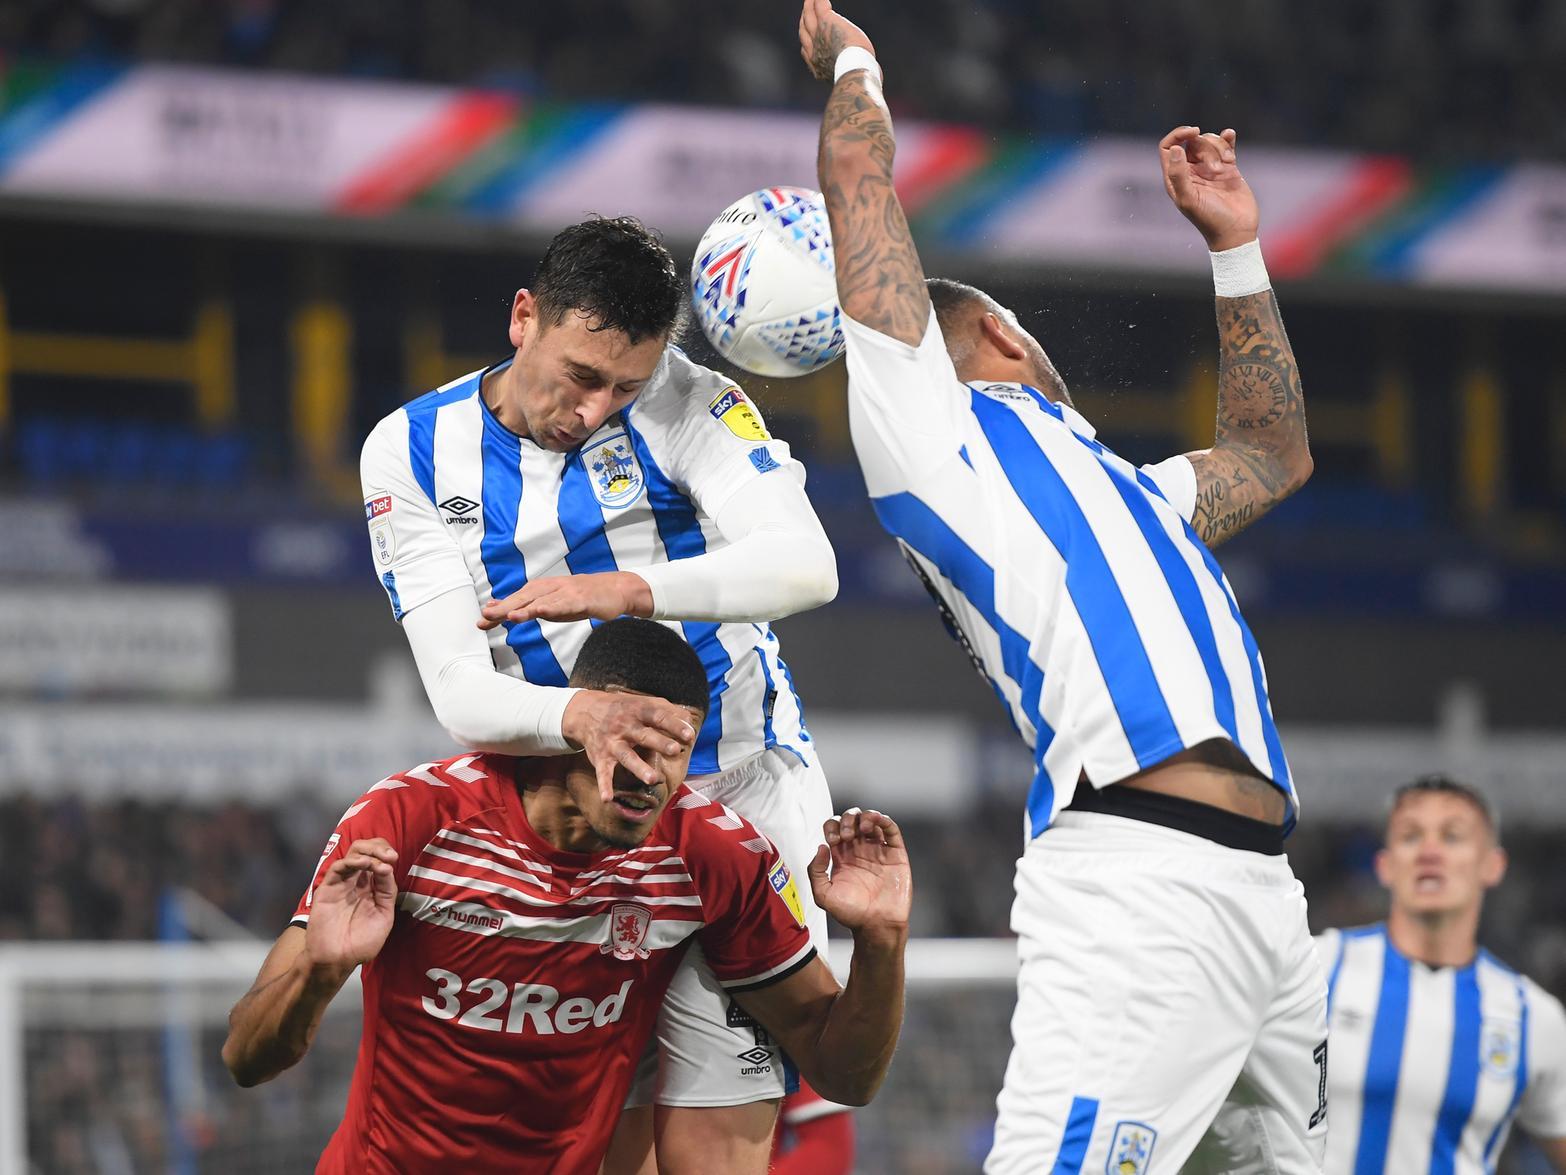 Huddersfield Town defender Tommy Elphick has described himself as feeling "gutted" as he prepares to have knee surgery following a tackle from Preston's Ryan Ledson last weekend. (Yorkshire Post)